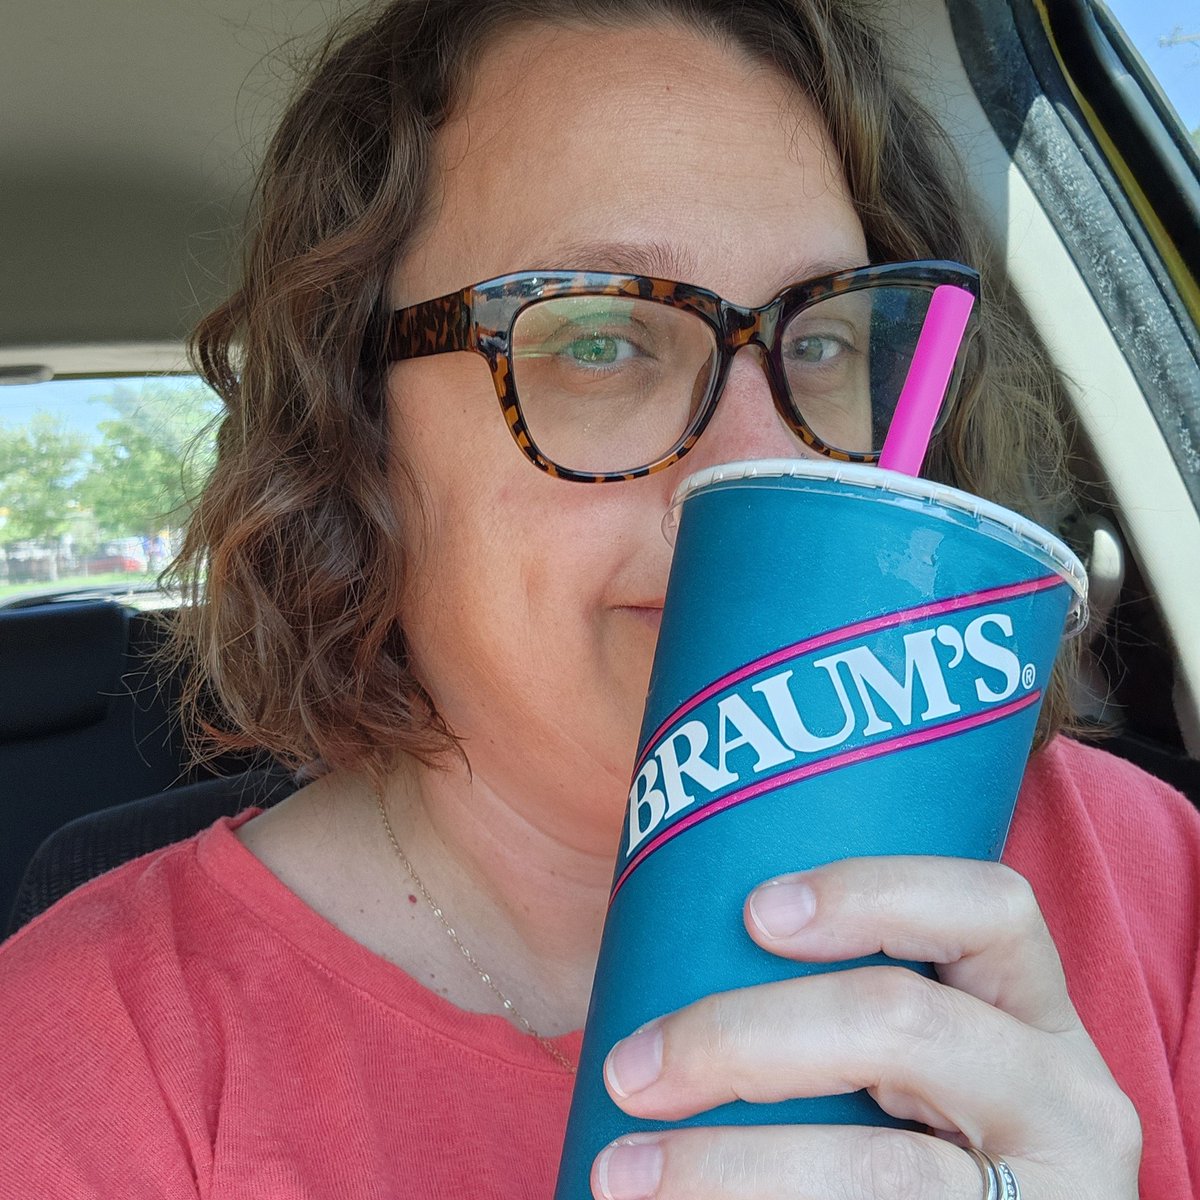 Love elementary land..but I sure as heck treated myself to a Braum's shake after. Nothing says tired like 8 classes of elementary tired!